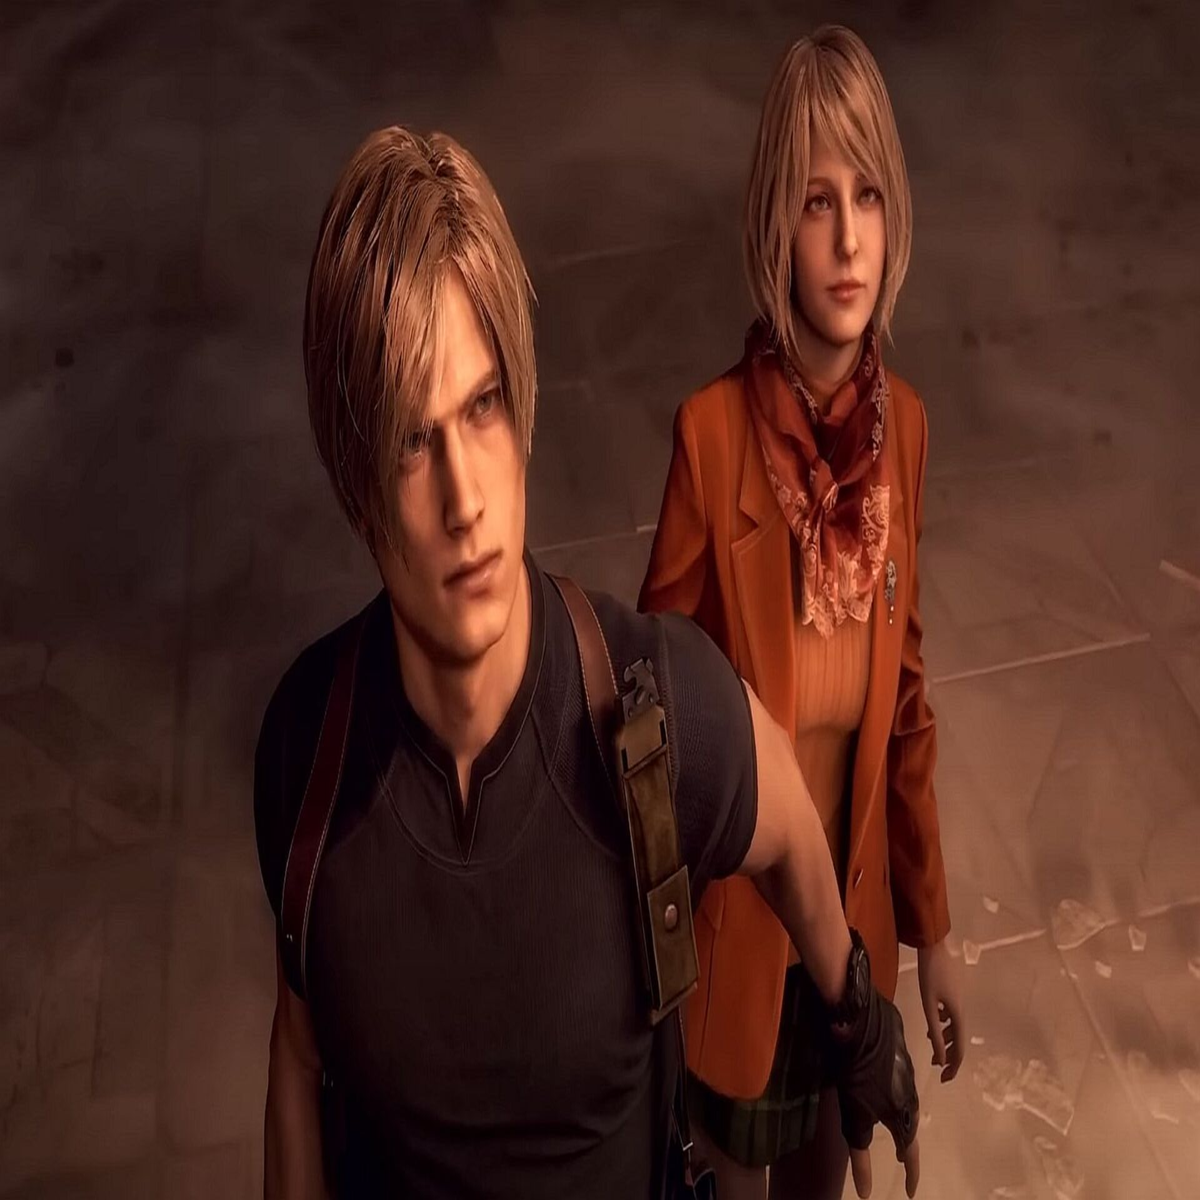 Resident Evil 4 review: I'll buy it at a high price